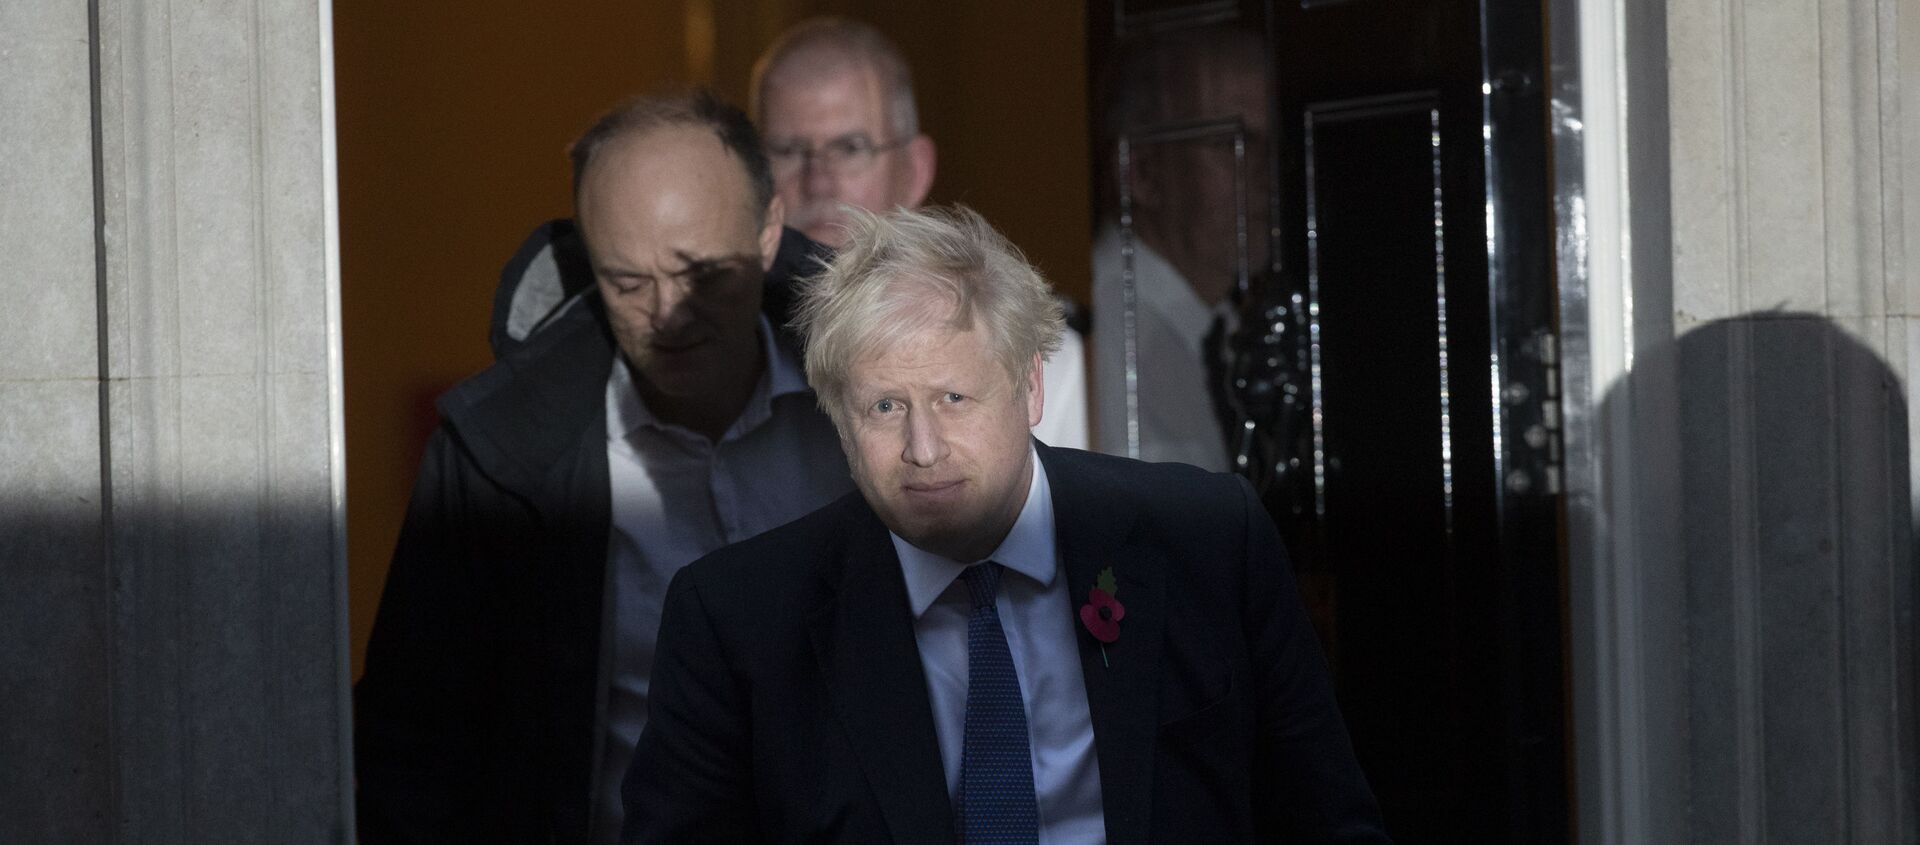 British Prime Minister Boris Johnson and his advisor Dominic Cummings, left, leave 10 Downing Street in London, and get in a car together to go to the Houses of Parliament, Monday, Oct. 28, 2019 - Sputnik International, 1920, 26.05.2021